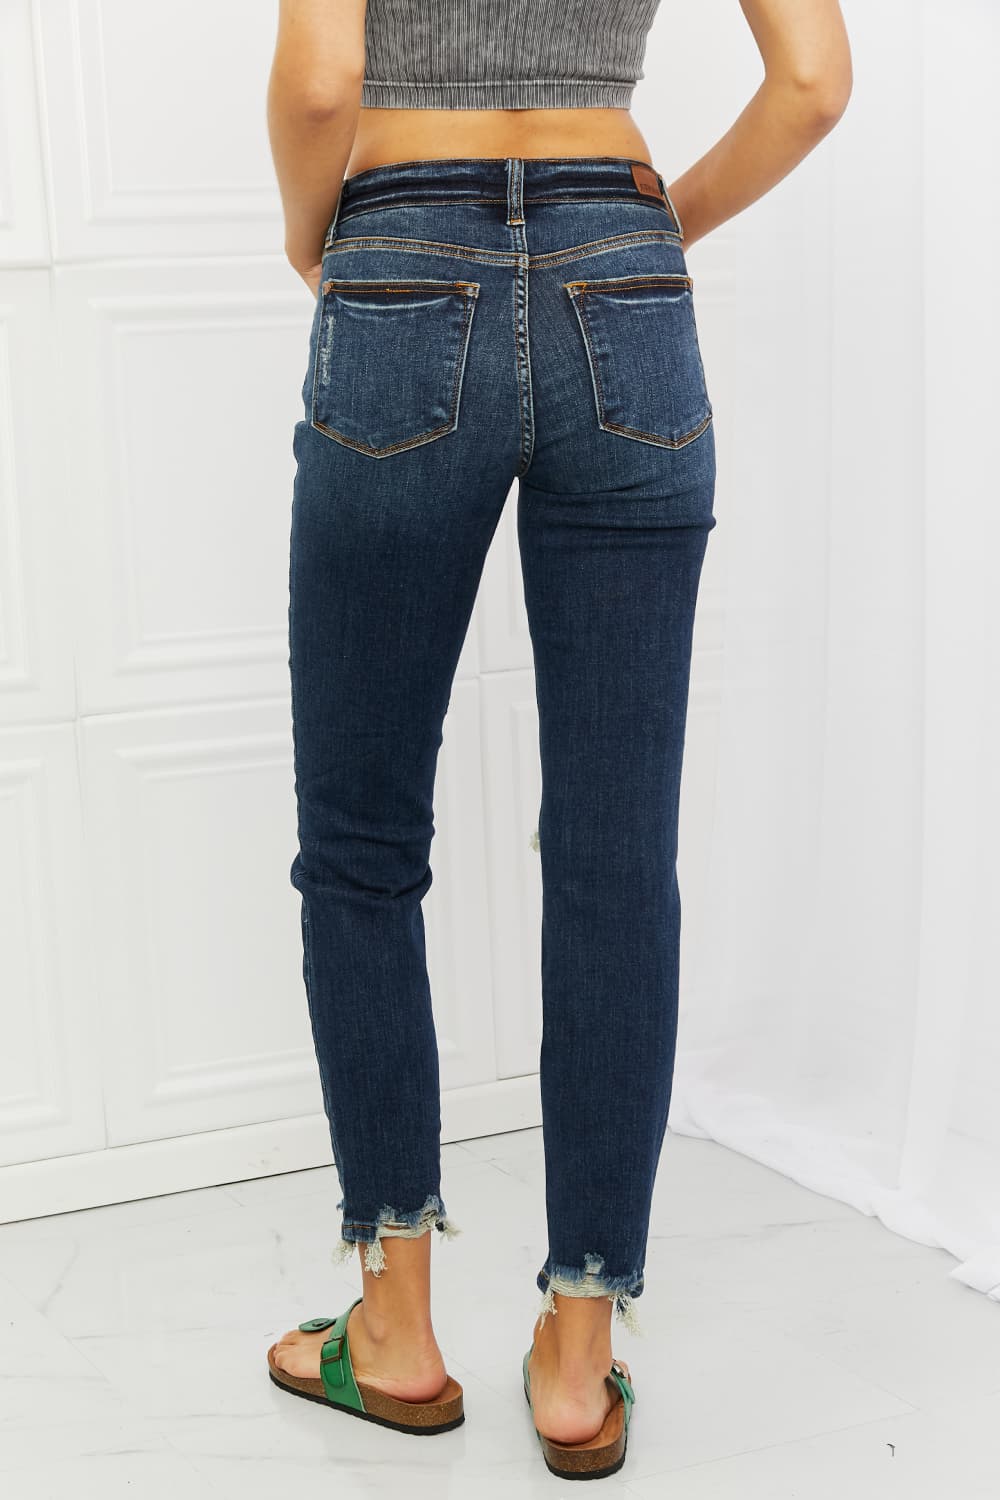 Back View, Judy Blue, Mid Rise Chopped Hem Relaxed Jeans Style 82446